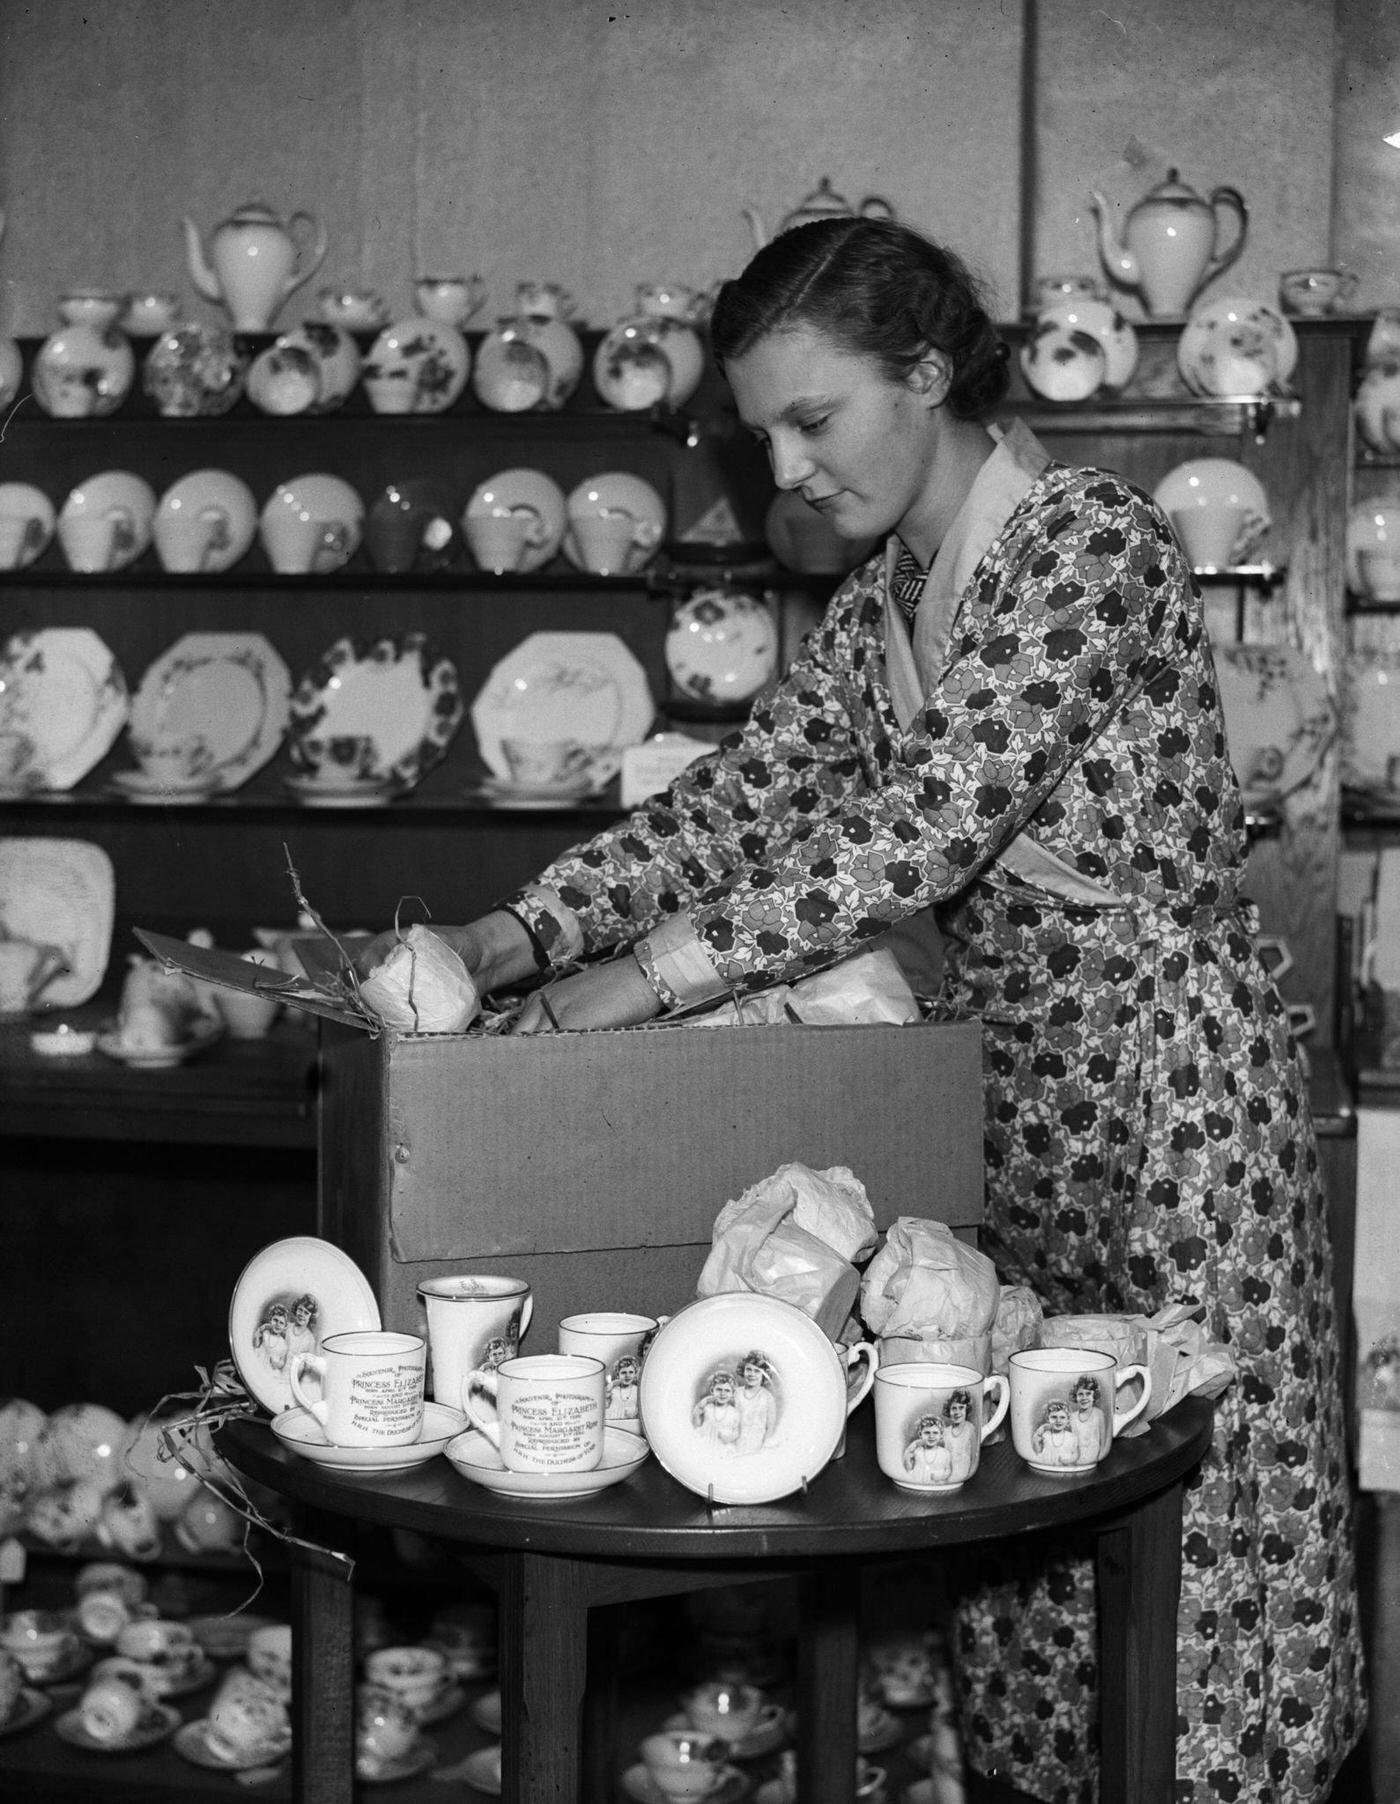 Woman Packs Cups and Saucers with Portraits of Princess Elizabeth and Margaret, 20th December 1933